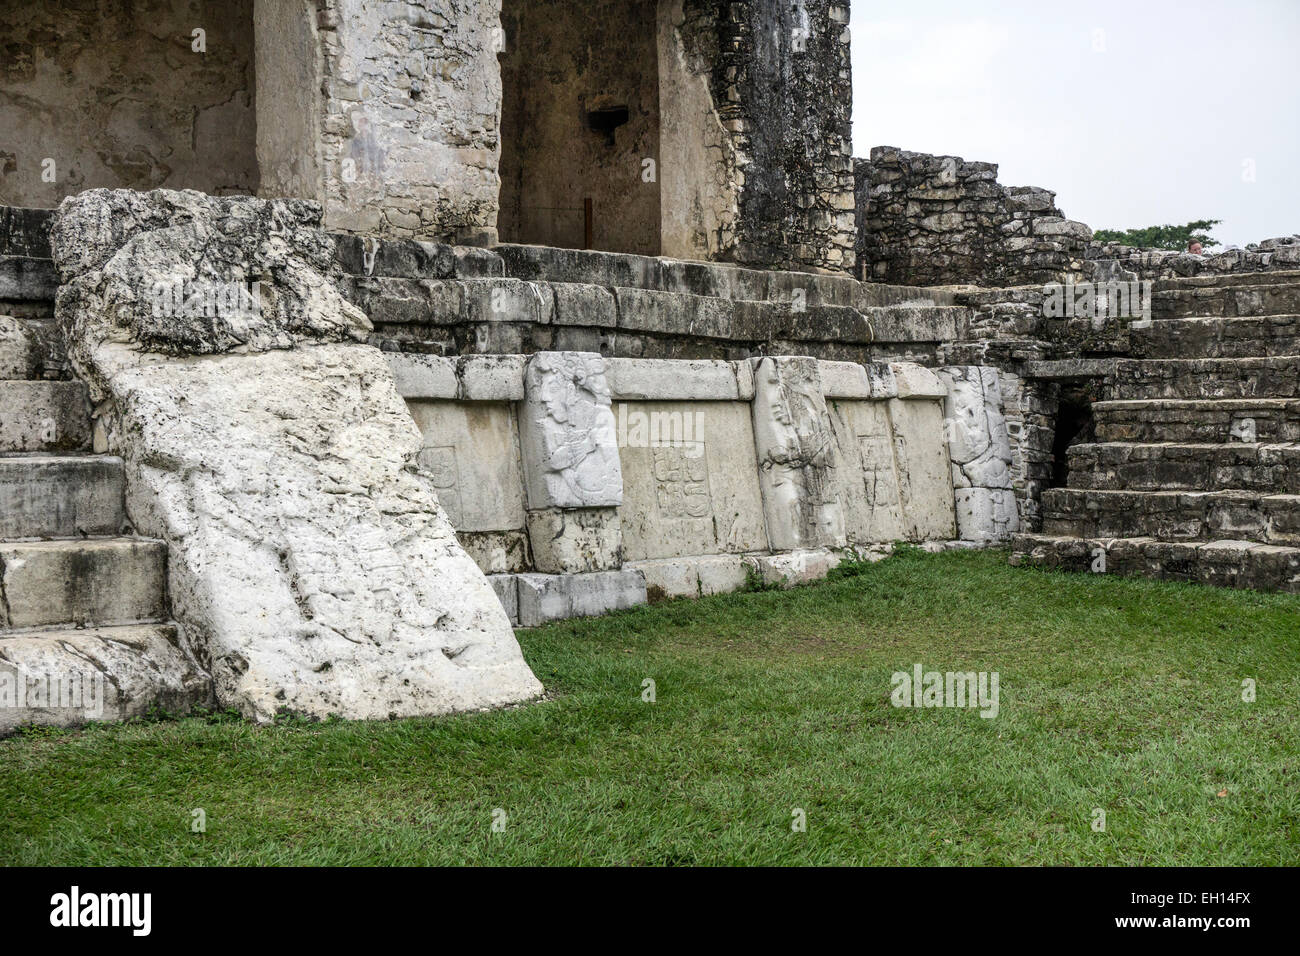 corner of east patio of Captured Chieftains with stone bas relief sculpture of captive warriors Mayan Palacio Palace complex Stock Photo